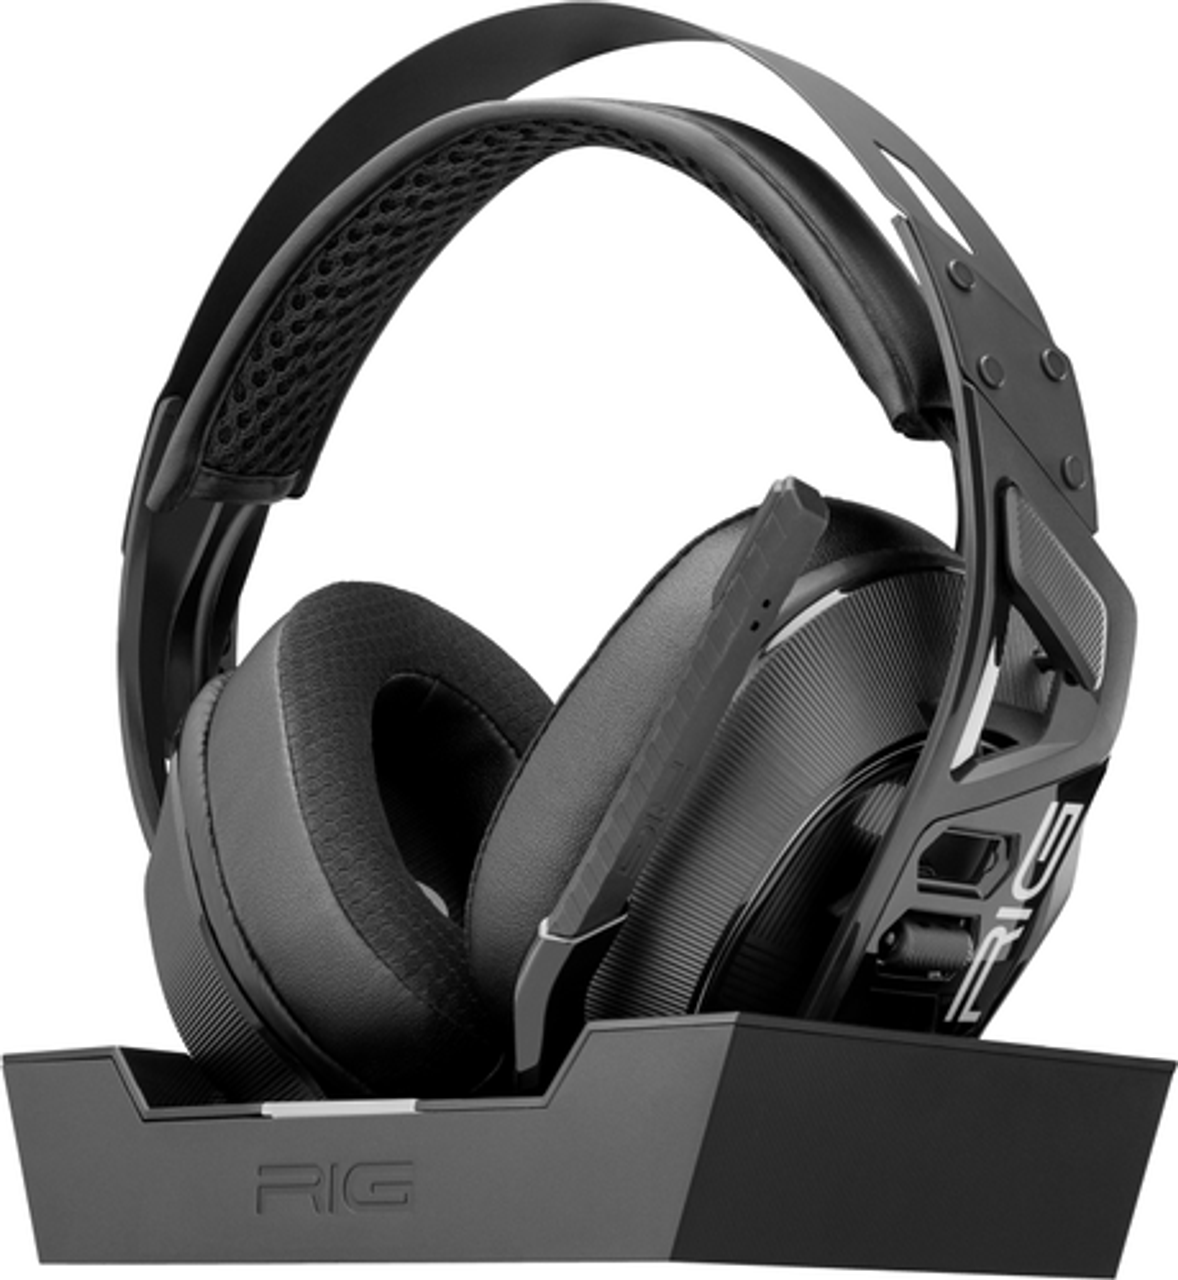 RIG - 900 Max HX Wireless Over-the-Ear Gaming Headset - Black